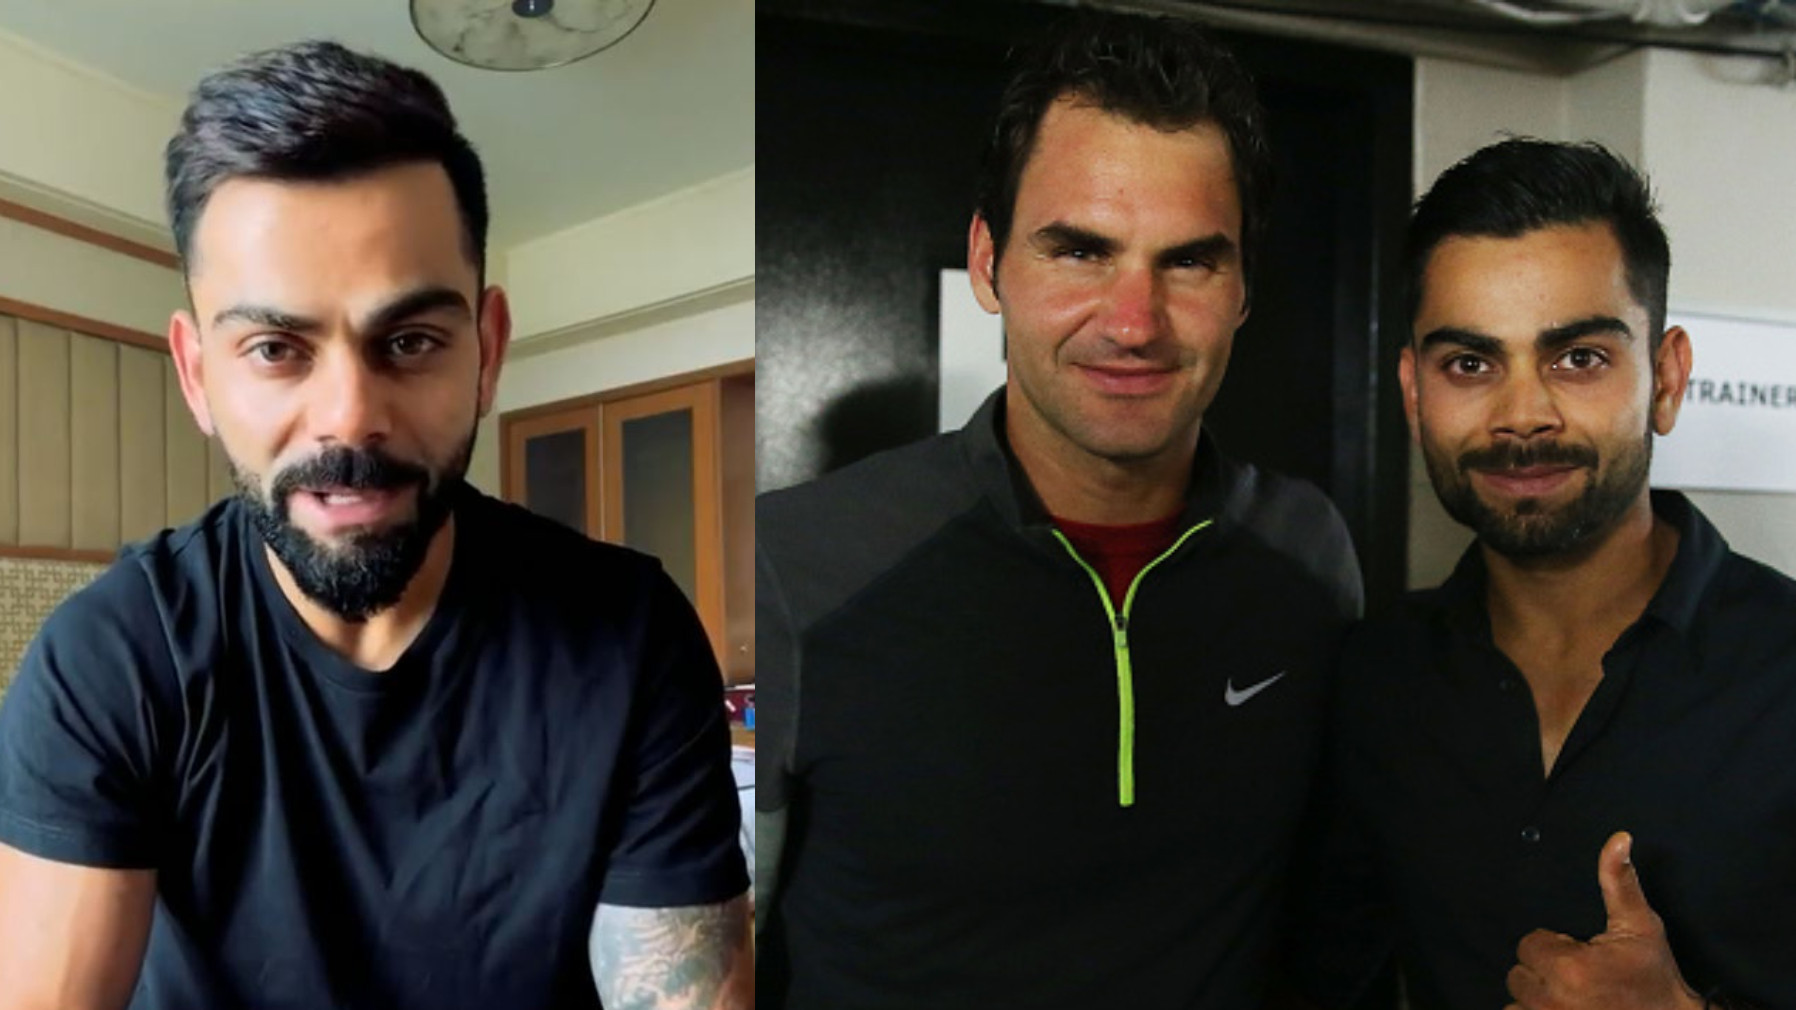 WATCH- ‘Thank you for all memorable moments and memories’- Virat Kohli’s heartfelt message to Roger Federer